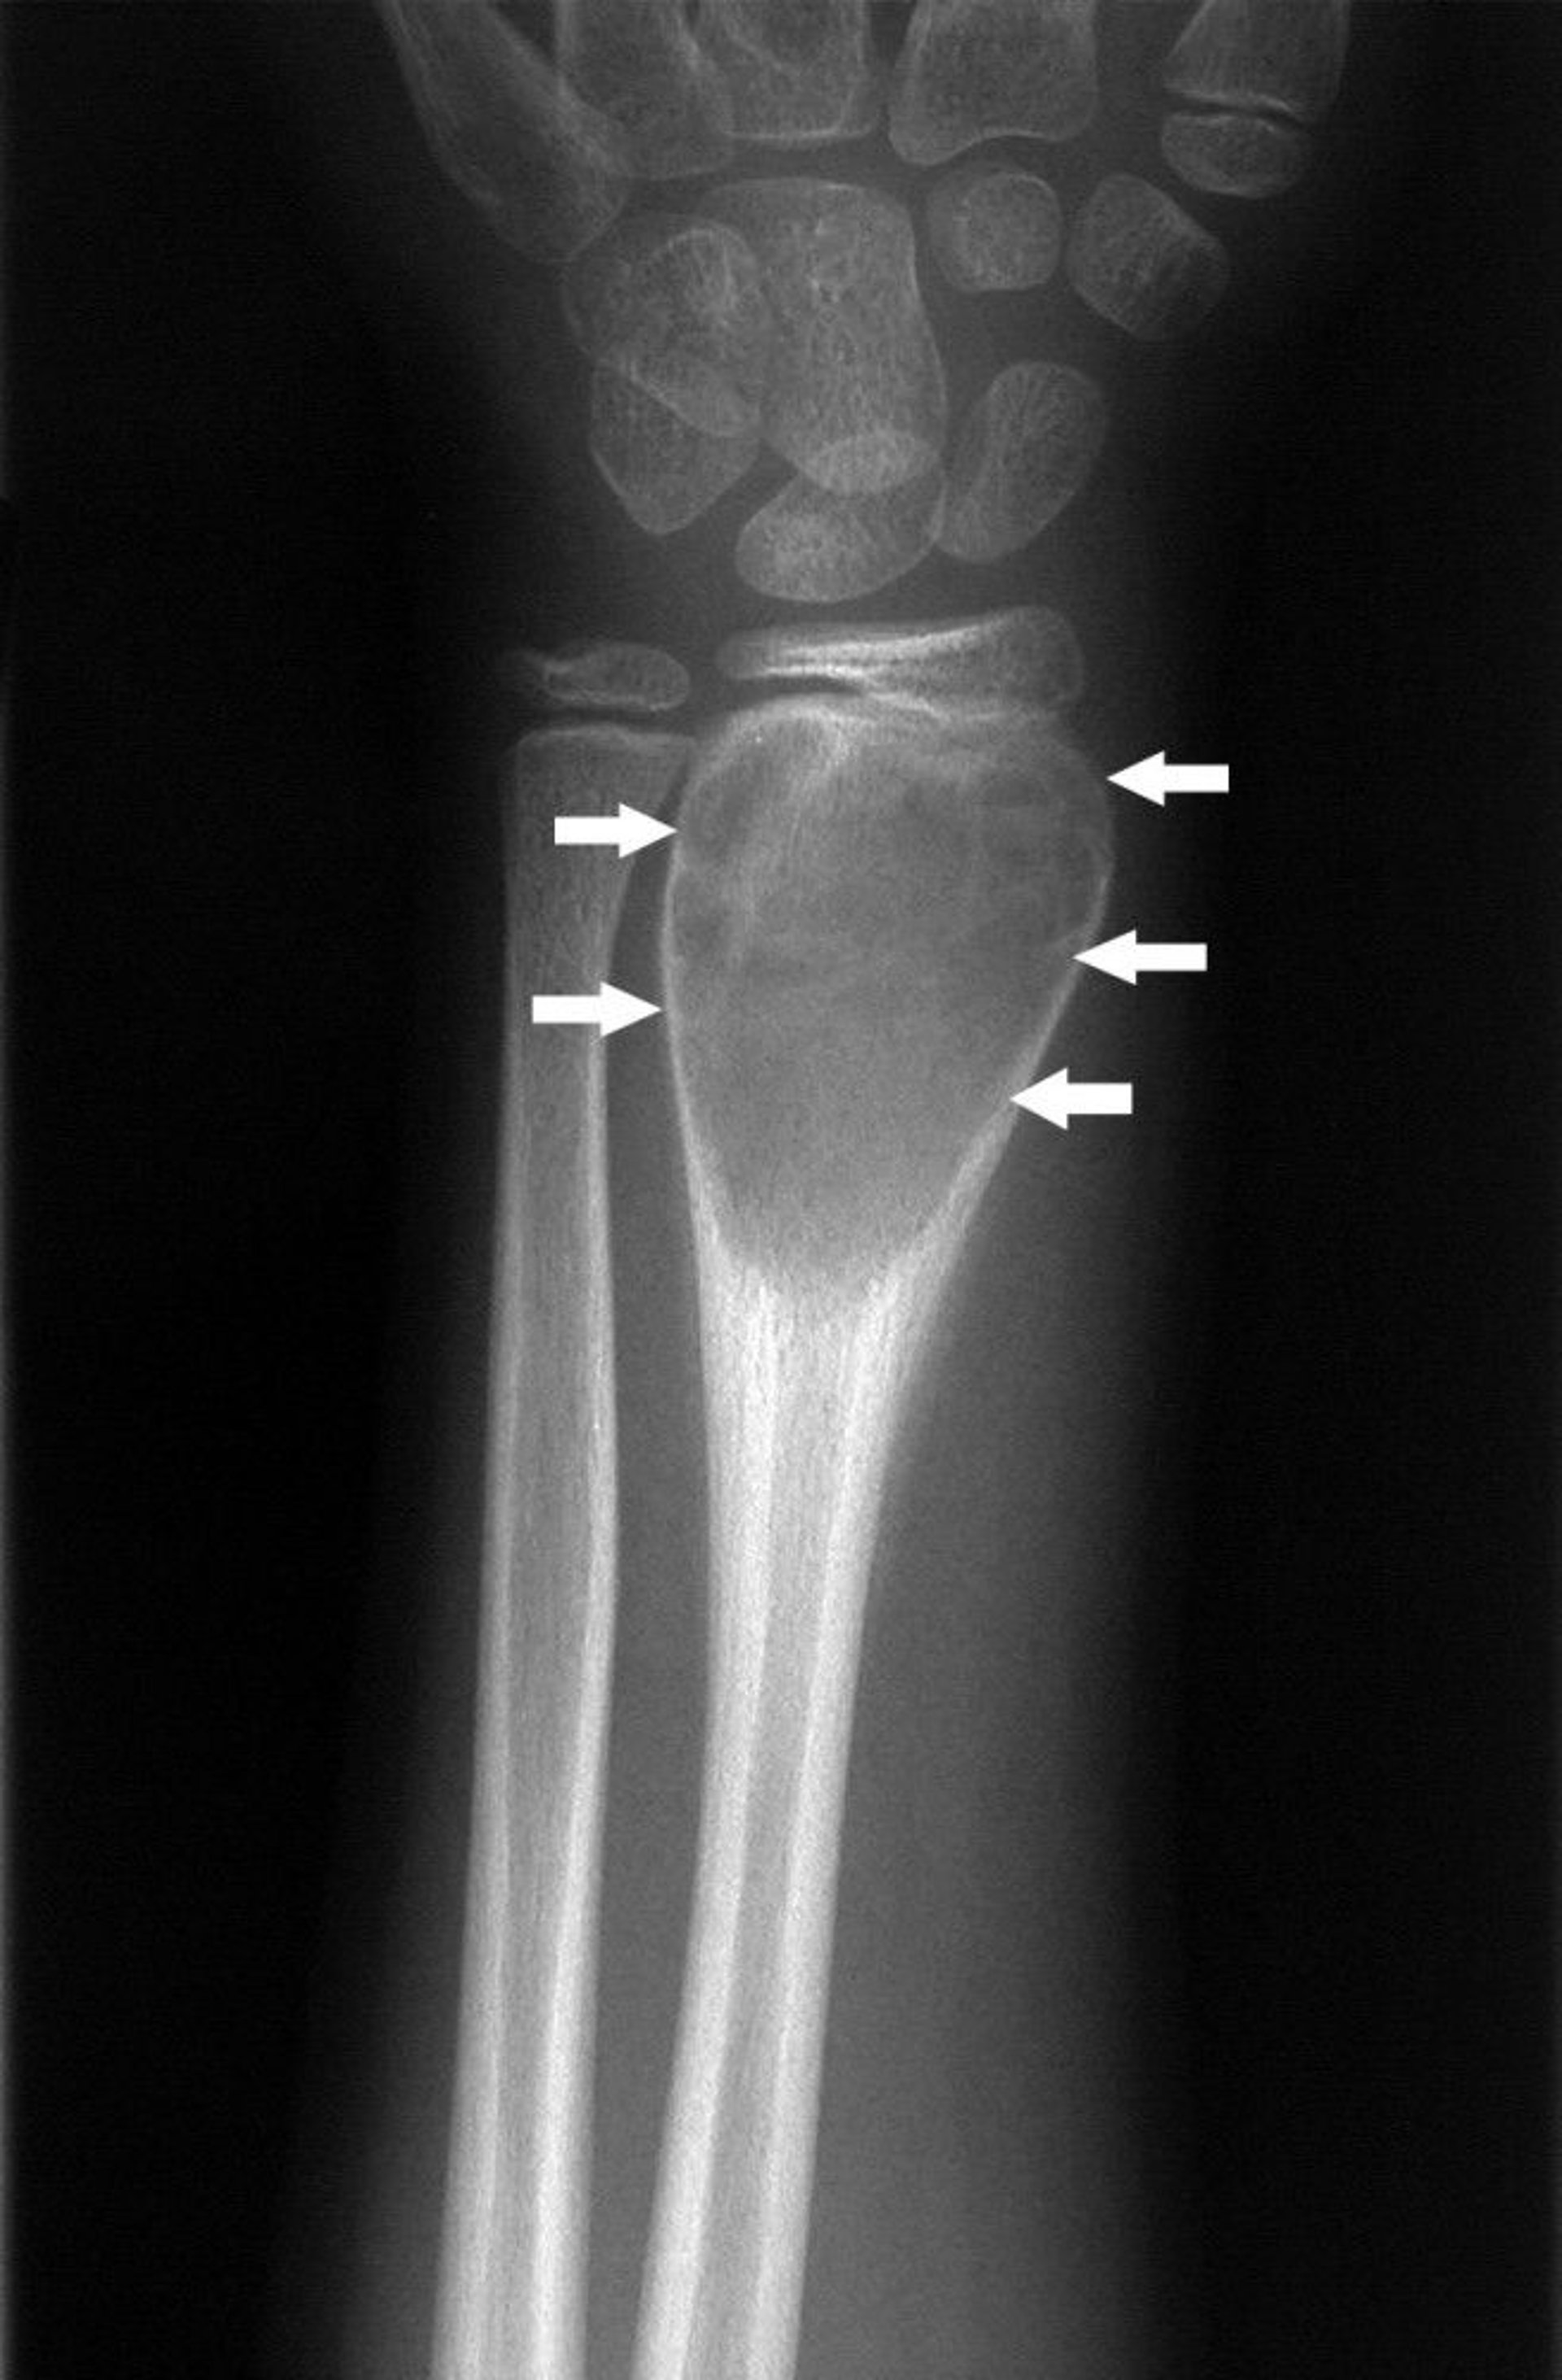 X-Ray of the Wrist